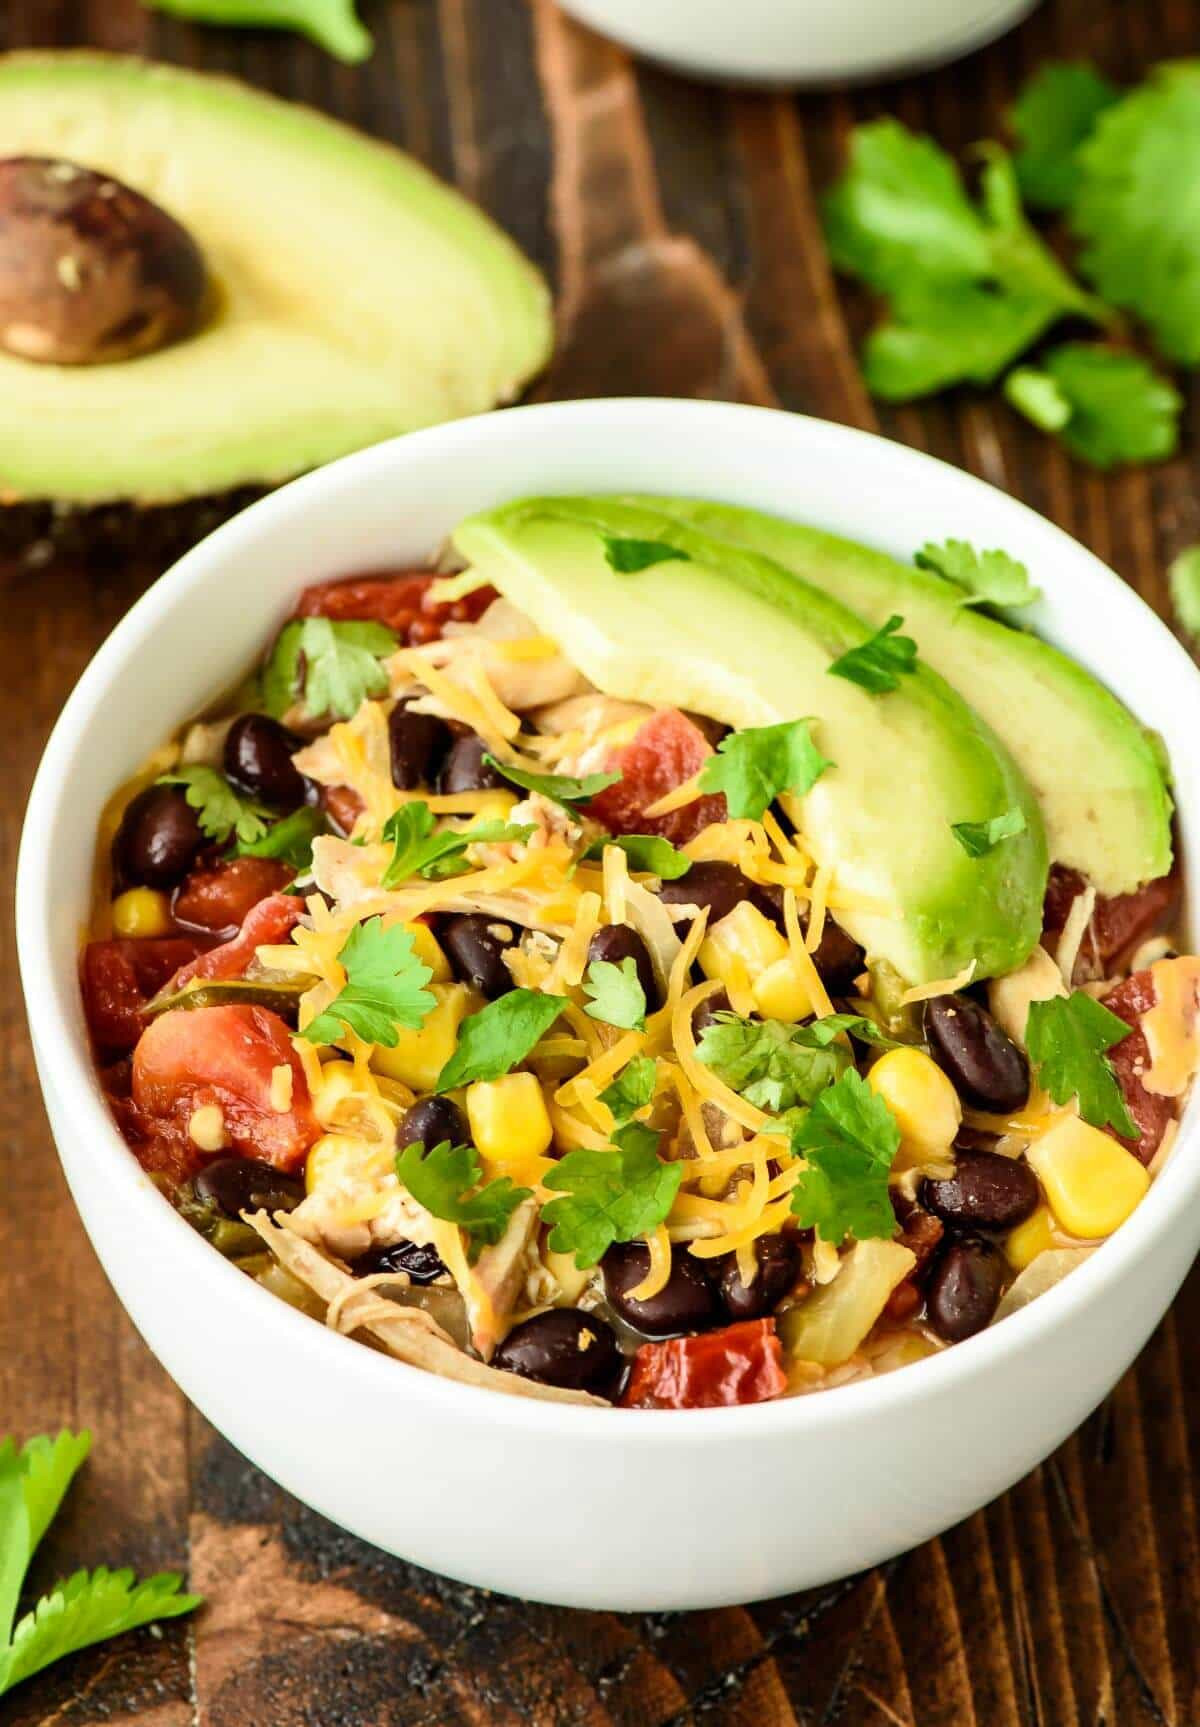 Healthy Slow Cooker Soup Recipes
 Slow Cooker Chicken Enchilada Soup